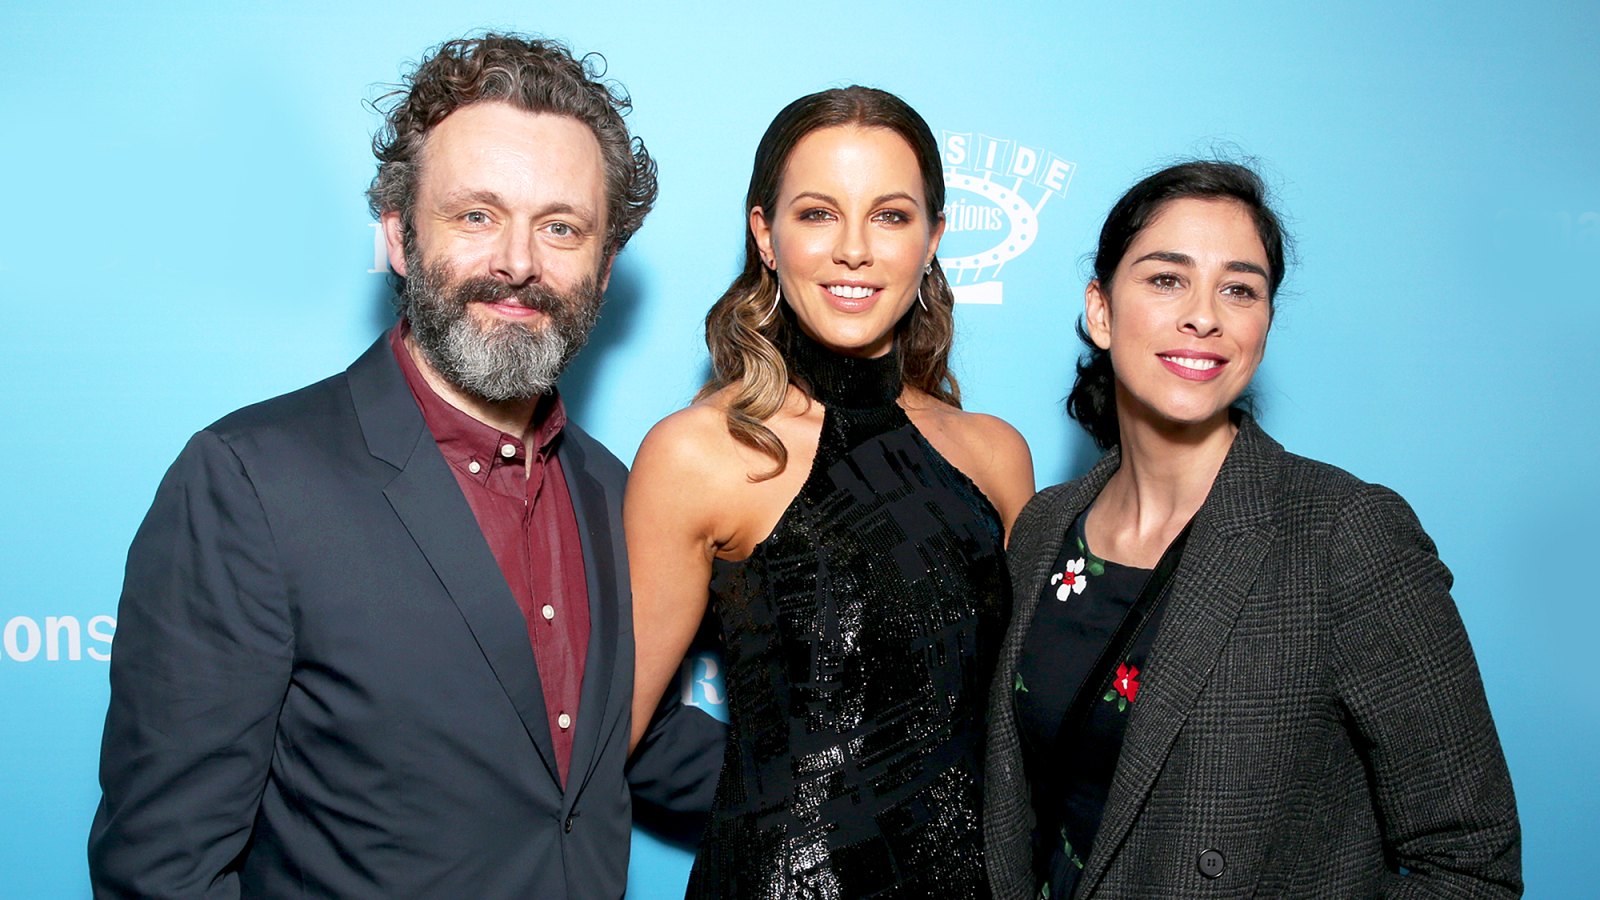 Michael Sheen, Kate Beckinsale and Sarah Silverman attend the 2016 premiere of "Love & Friendship" at the Directors Guild of America in Los Angeles, California.